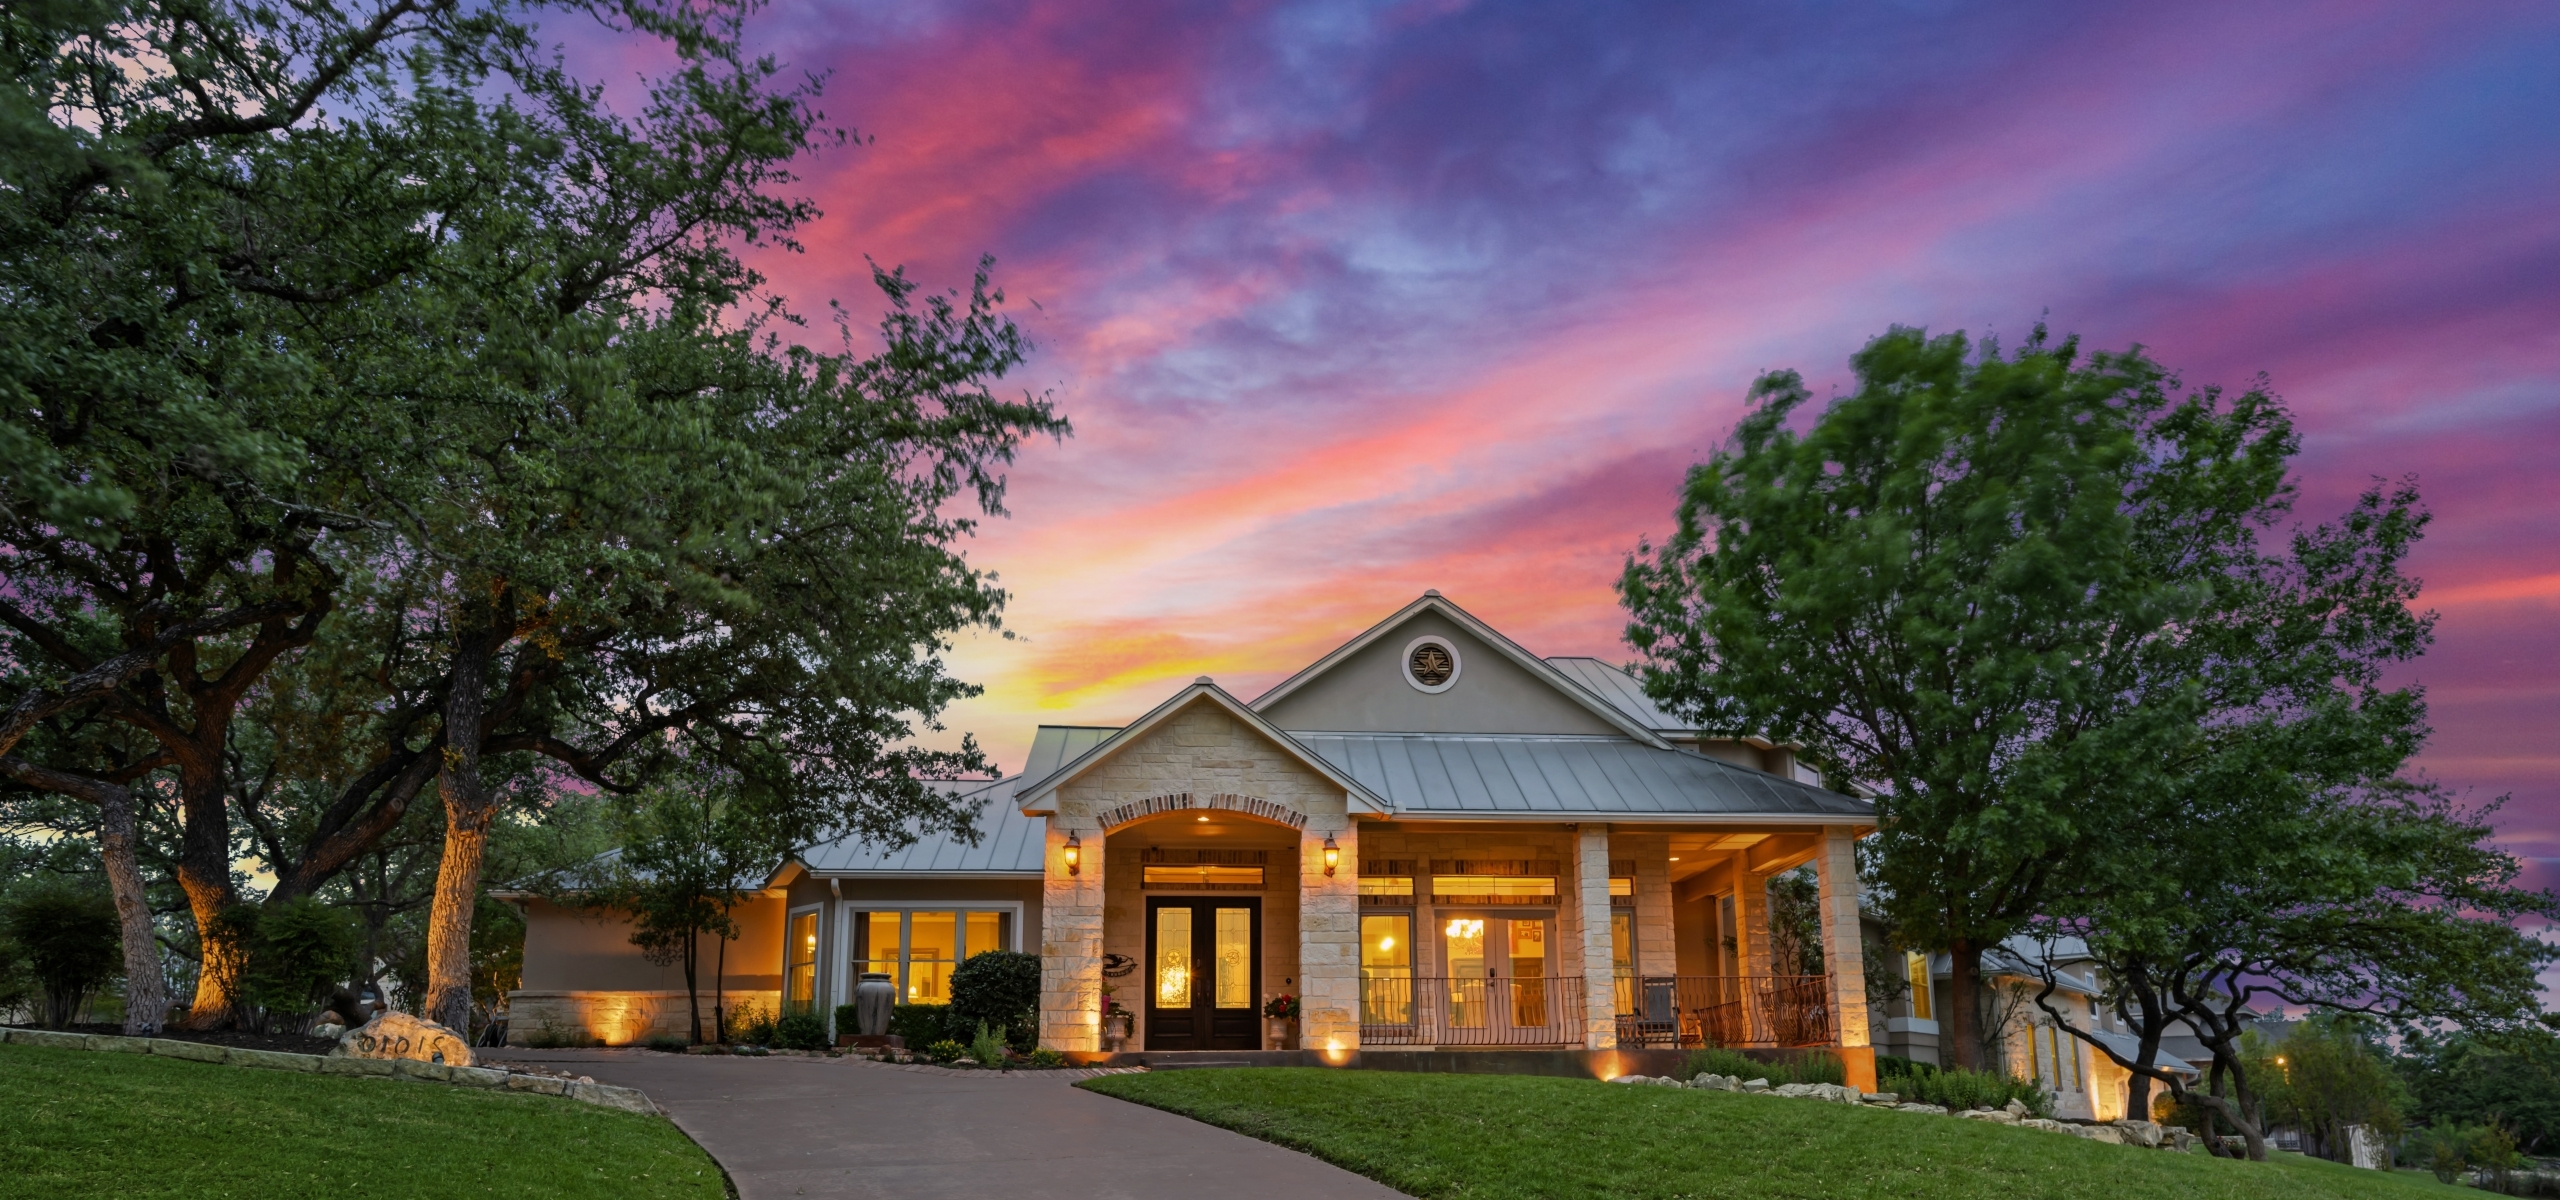 Southlake homes for sale